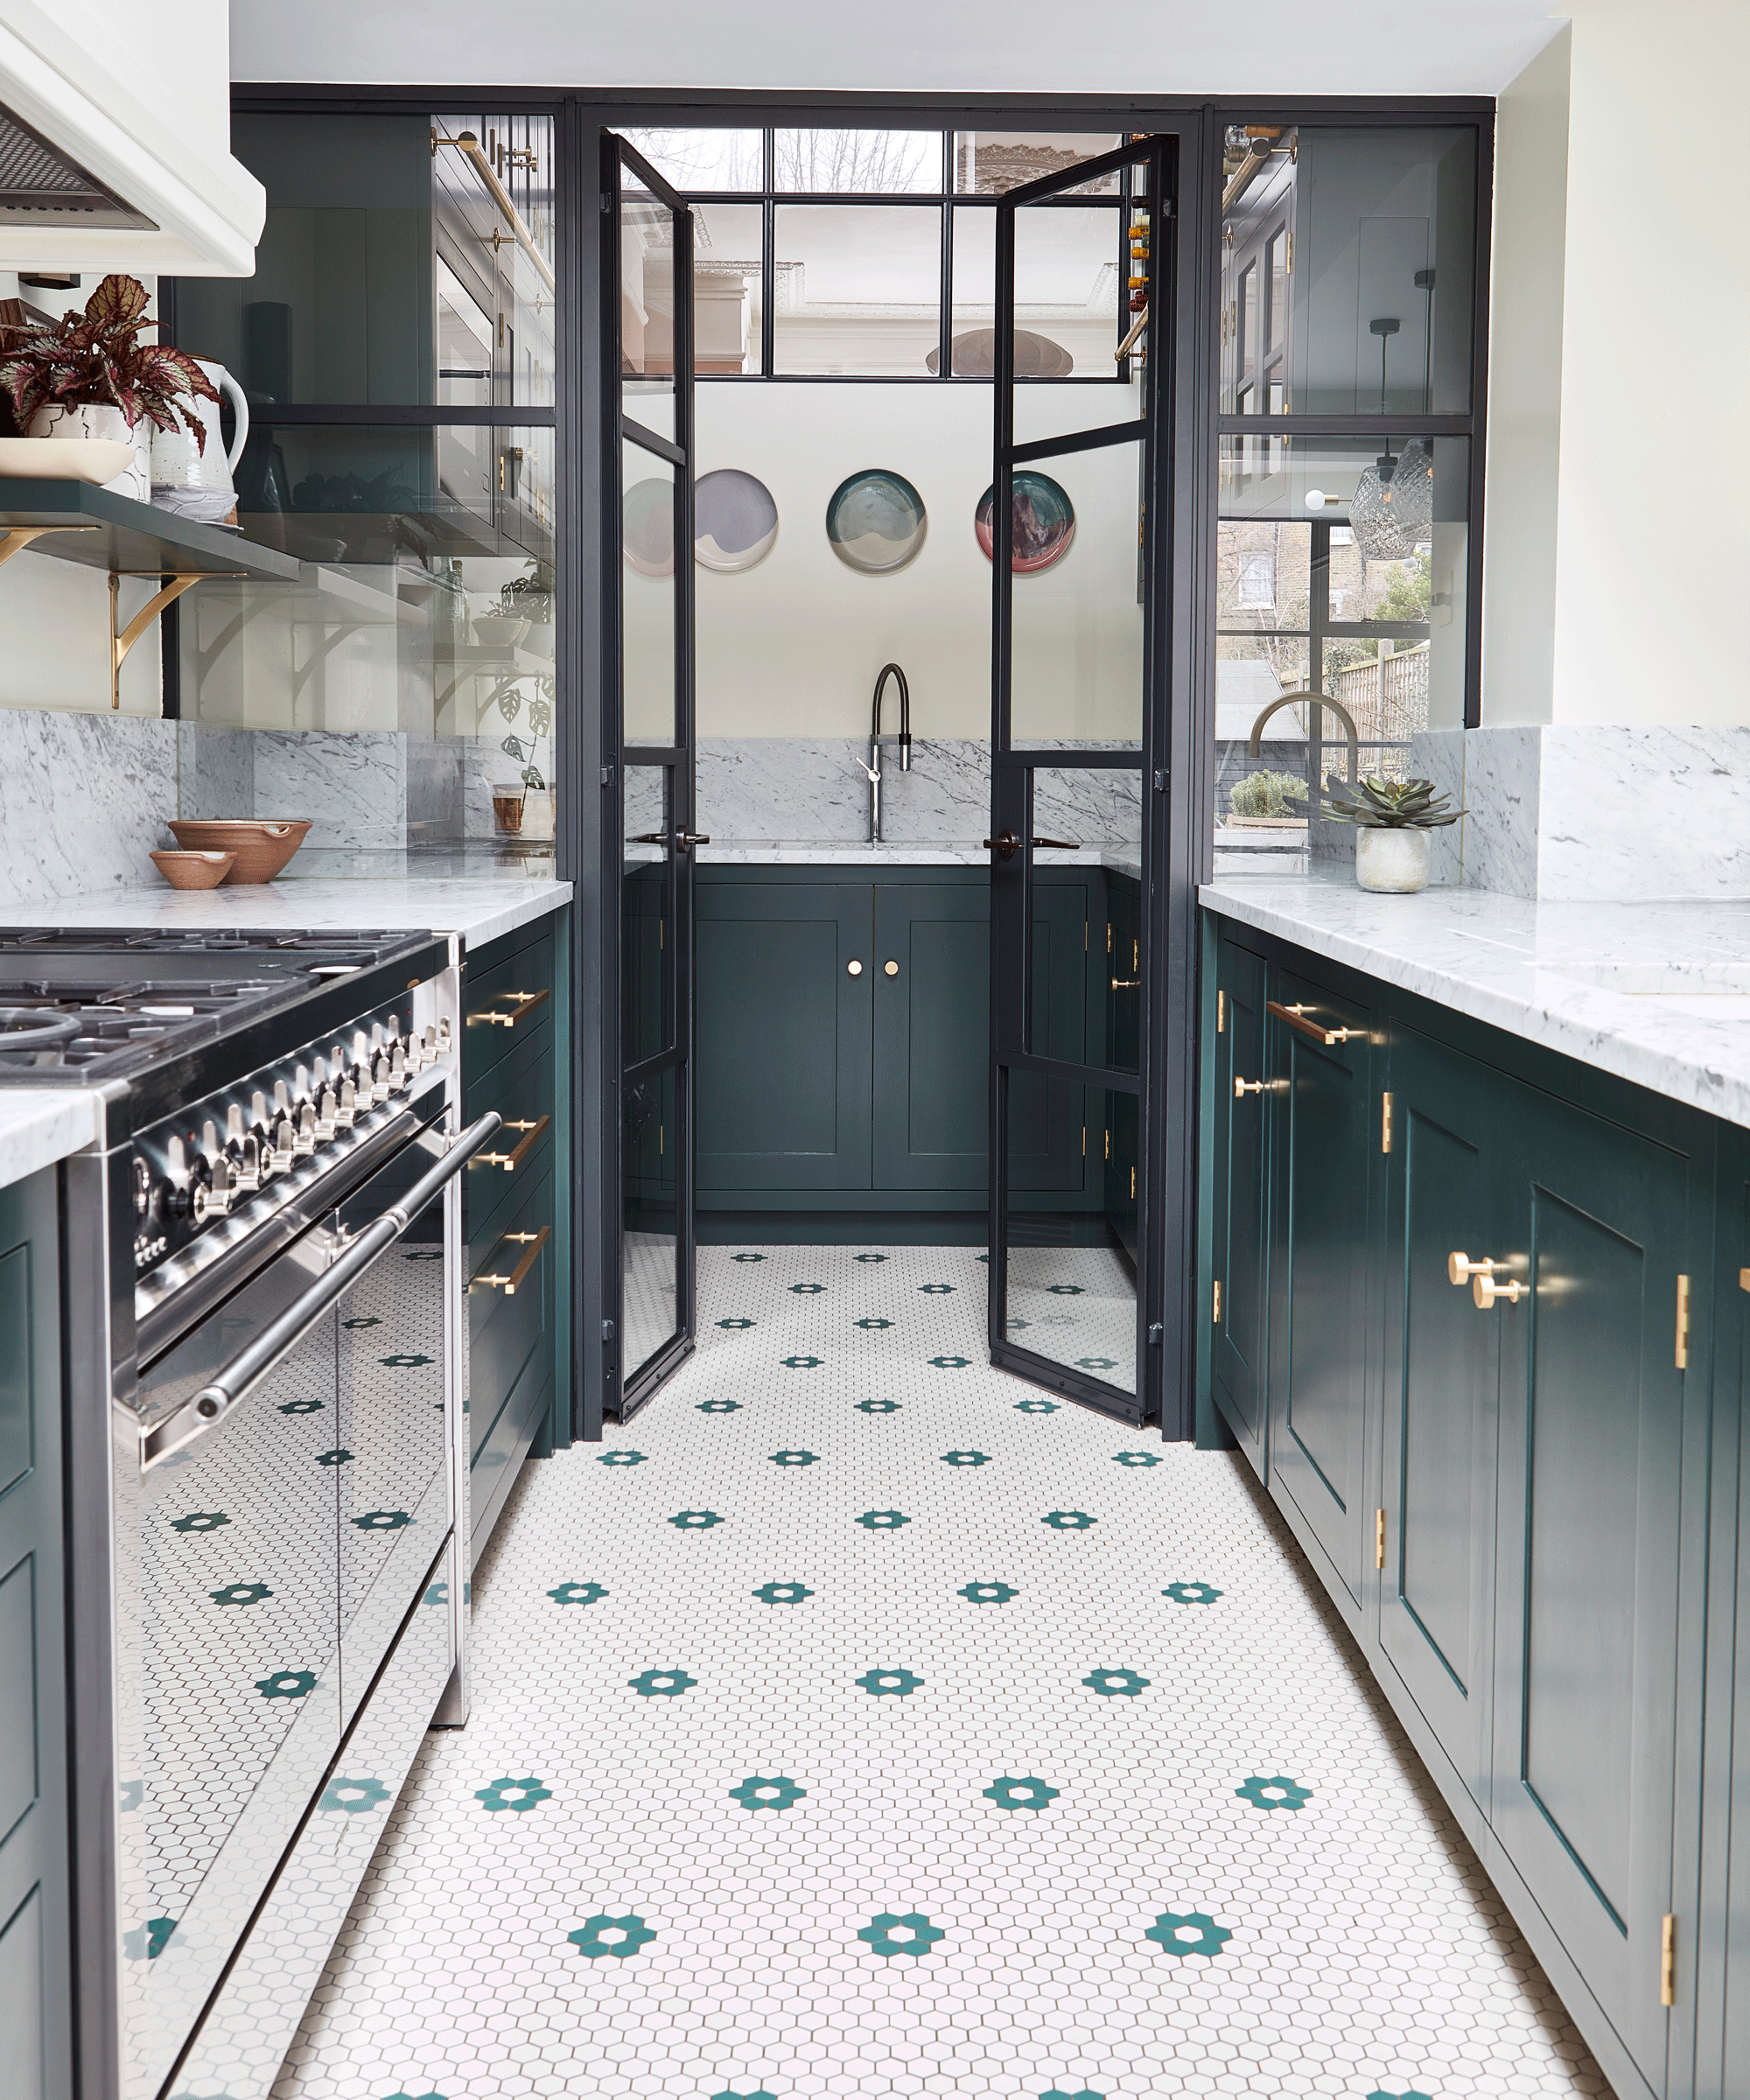 Galley kitchen with penny tiles and blue cabinetry